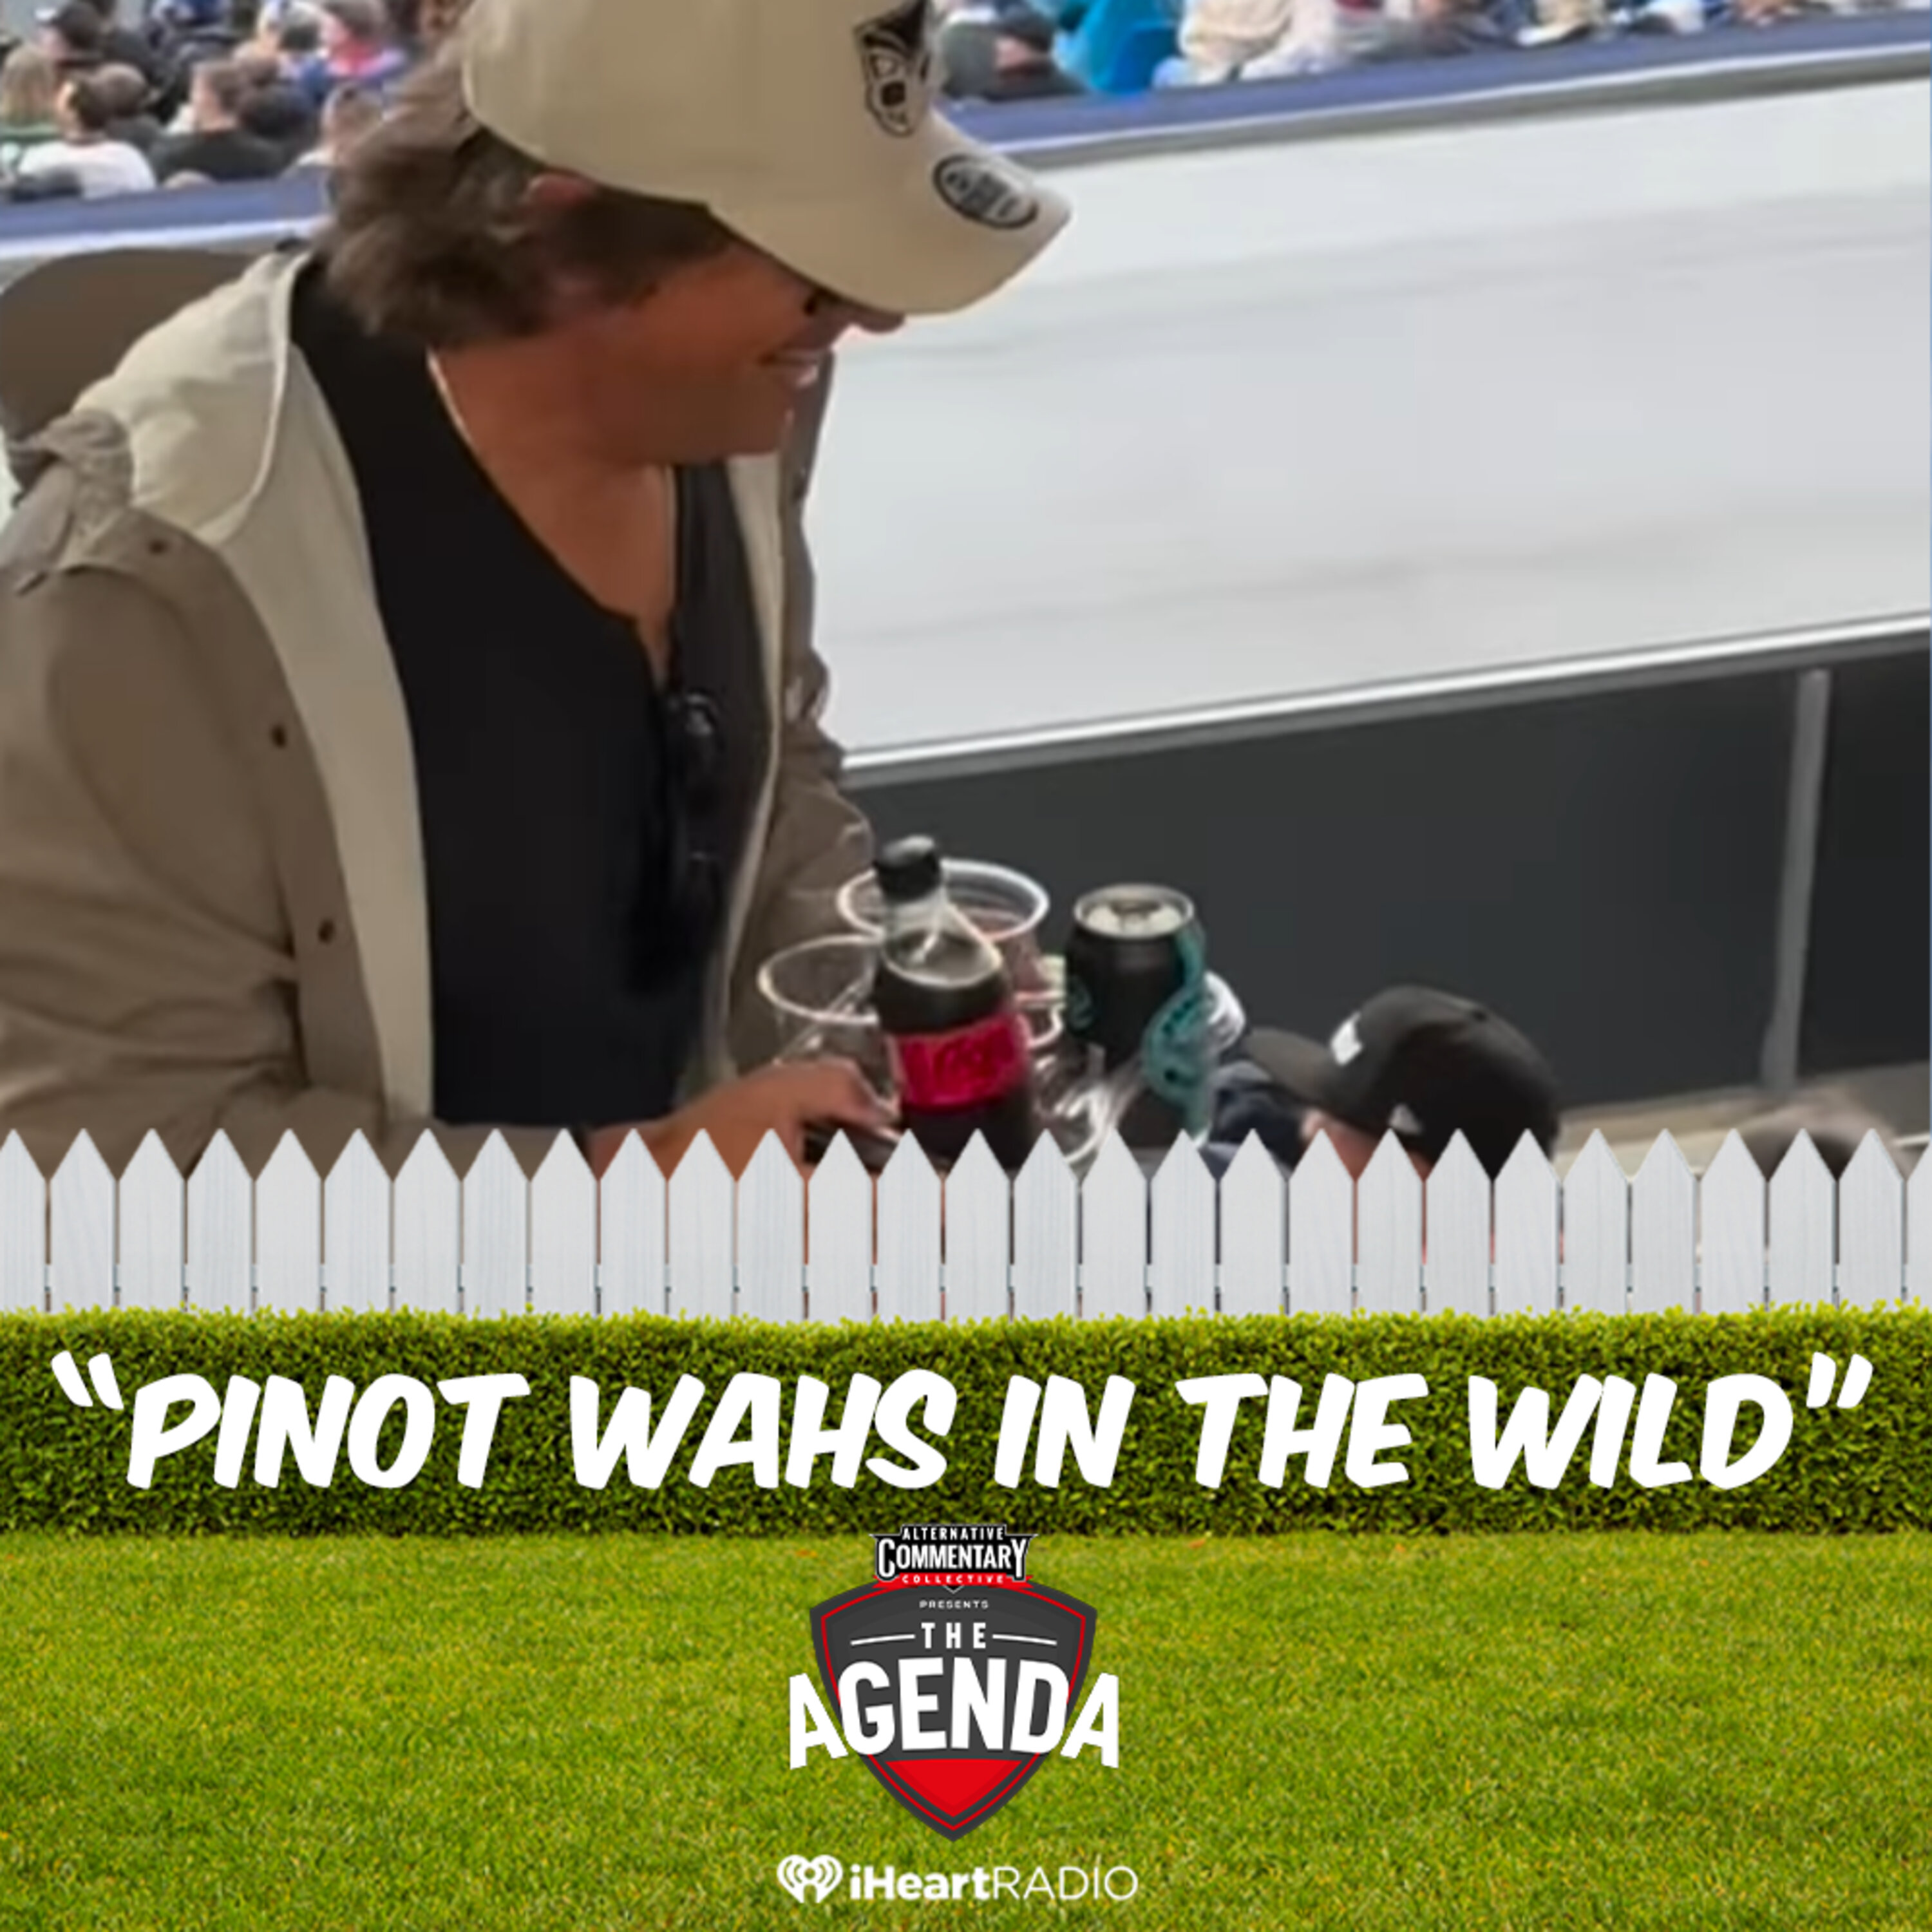 "Pinot Wahs In The Wild"